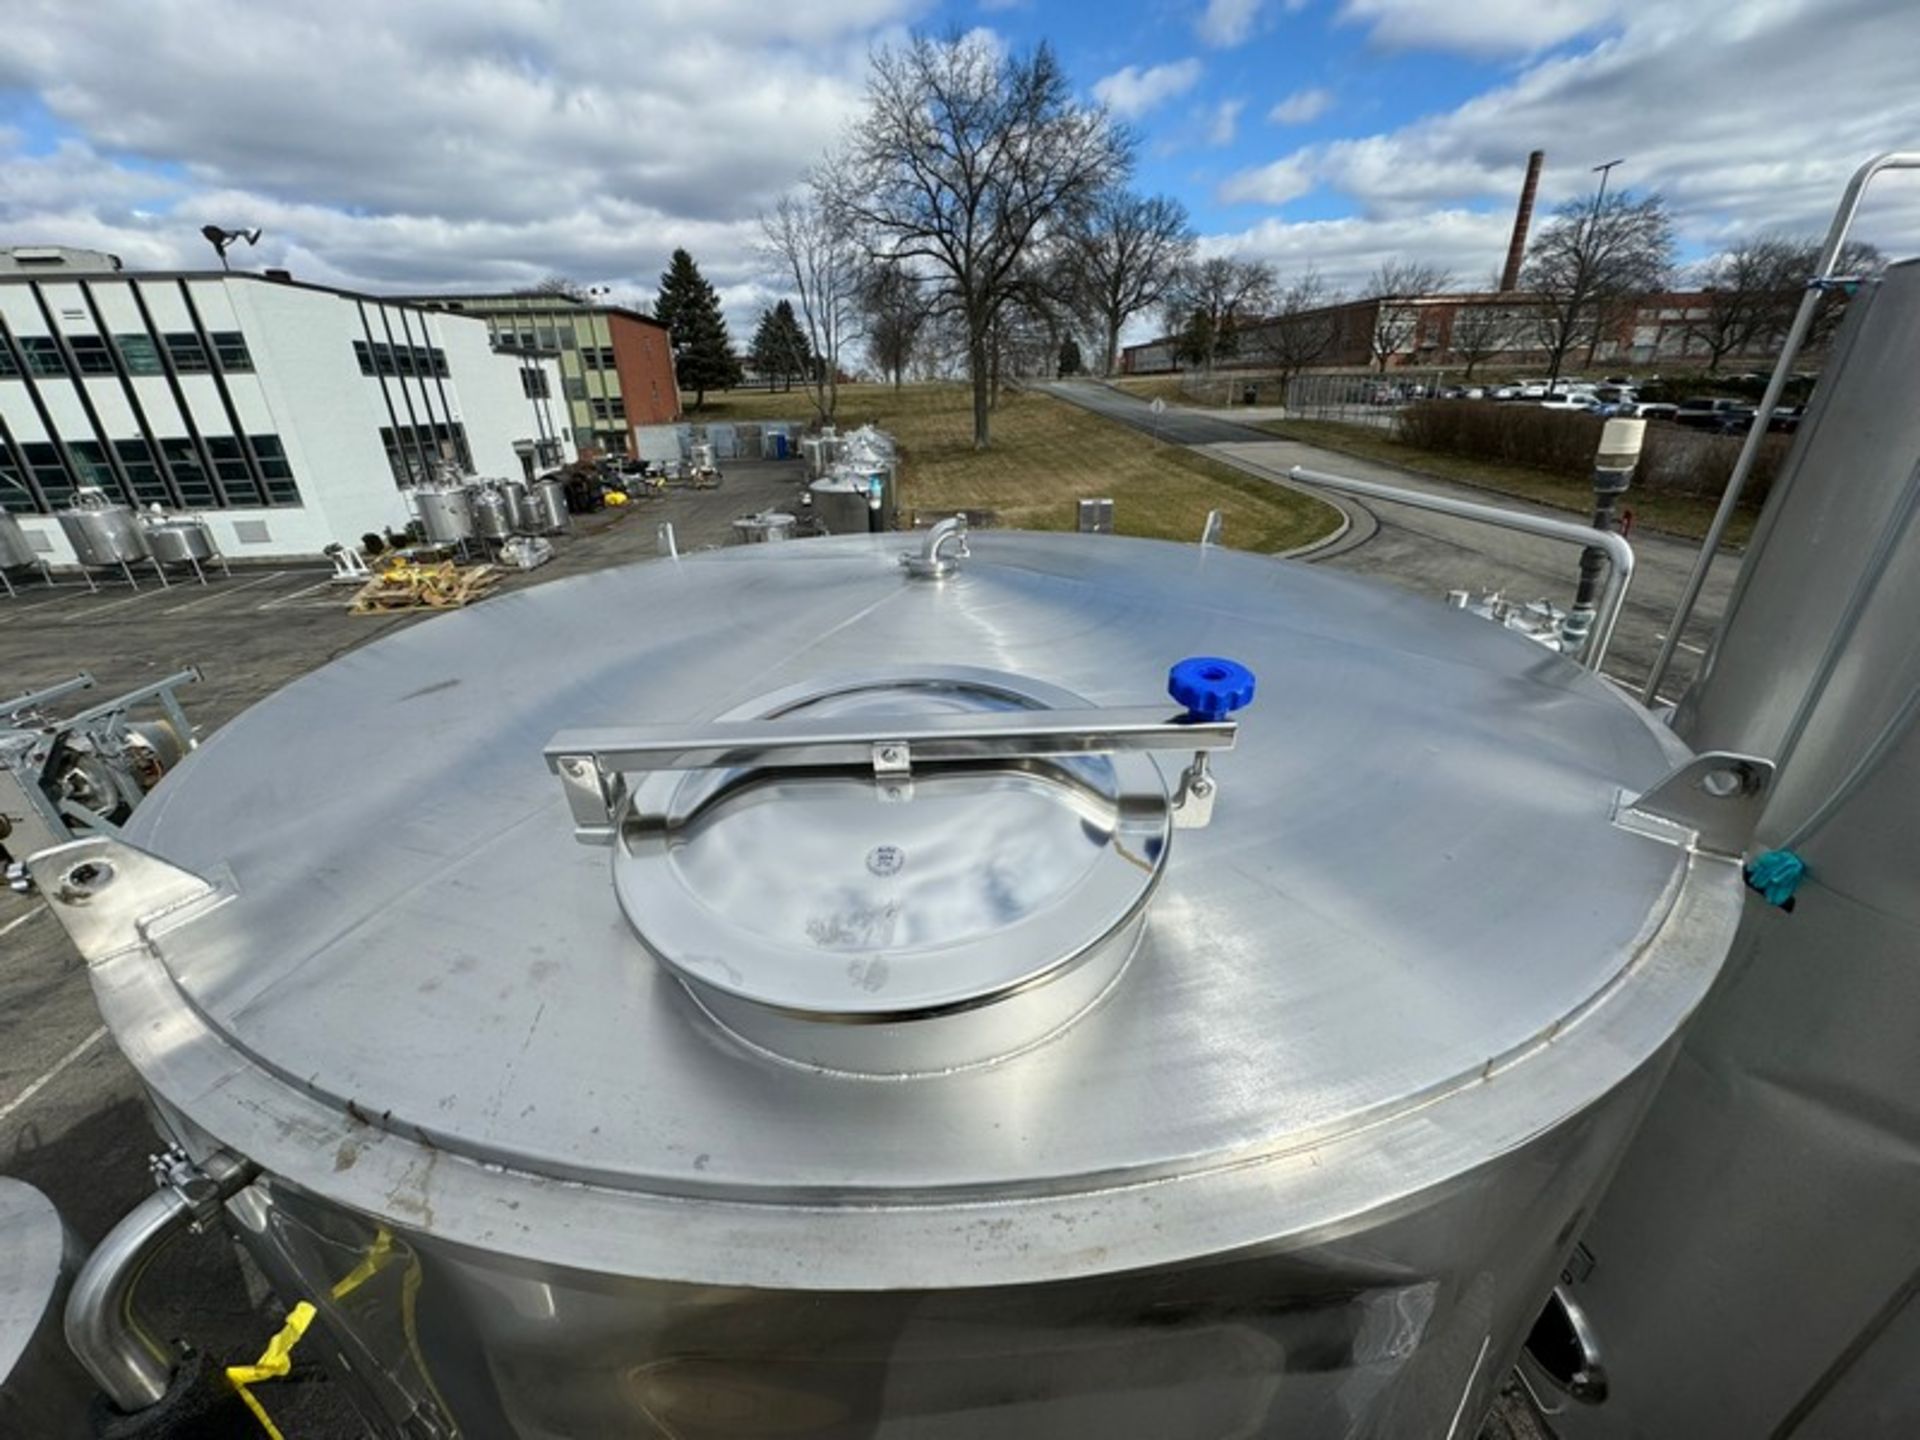 2012 Specific Mechanical Systems 200 BBL Capacity S/S Cold Liquor Tank, S/N RMP-136-12-300, with S/S - Image 11 of 11